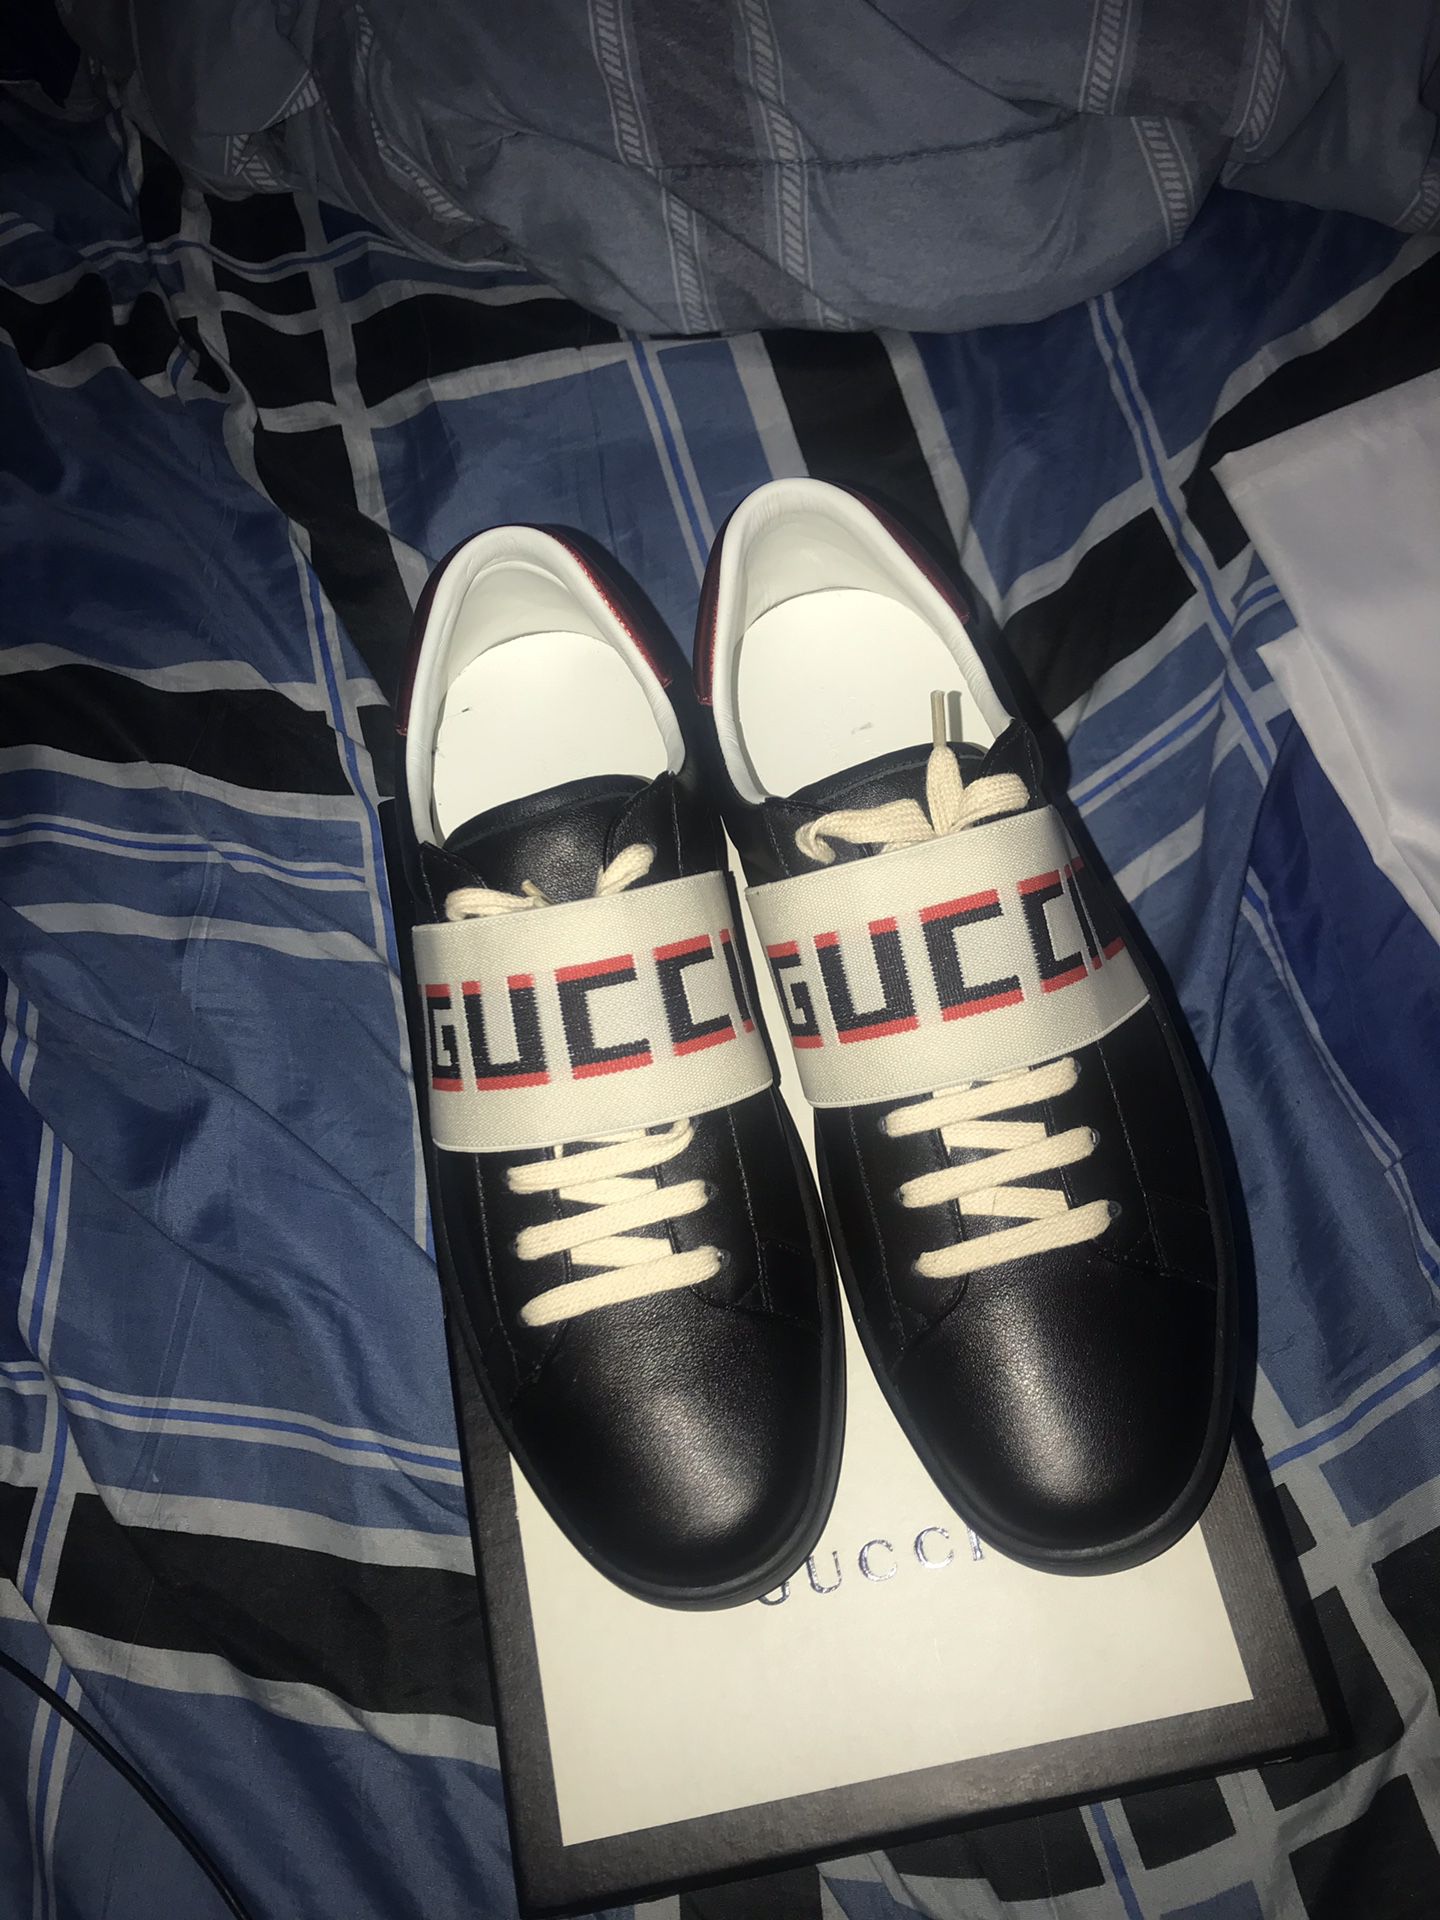 Gucci’s size 11 only worn once